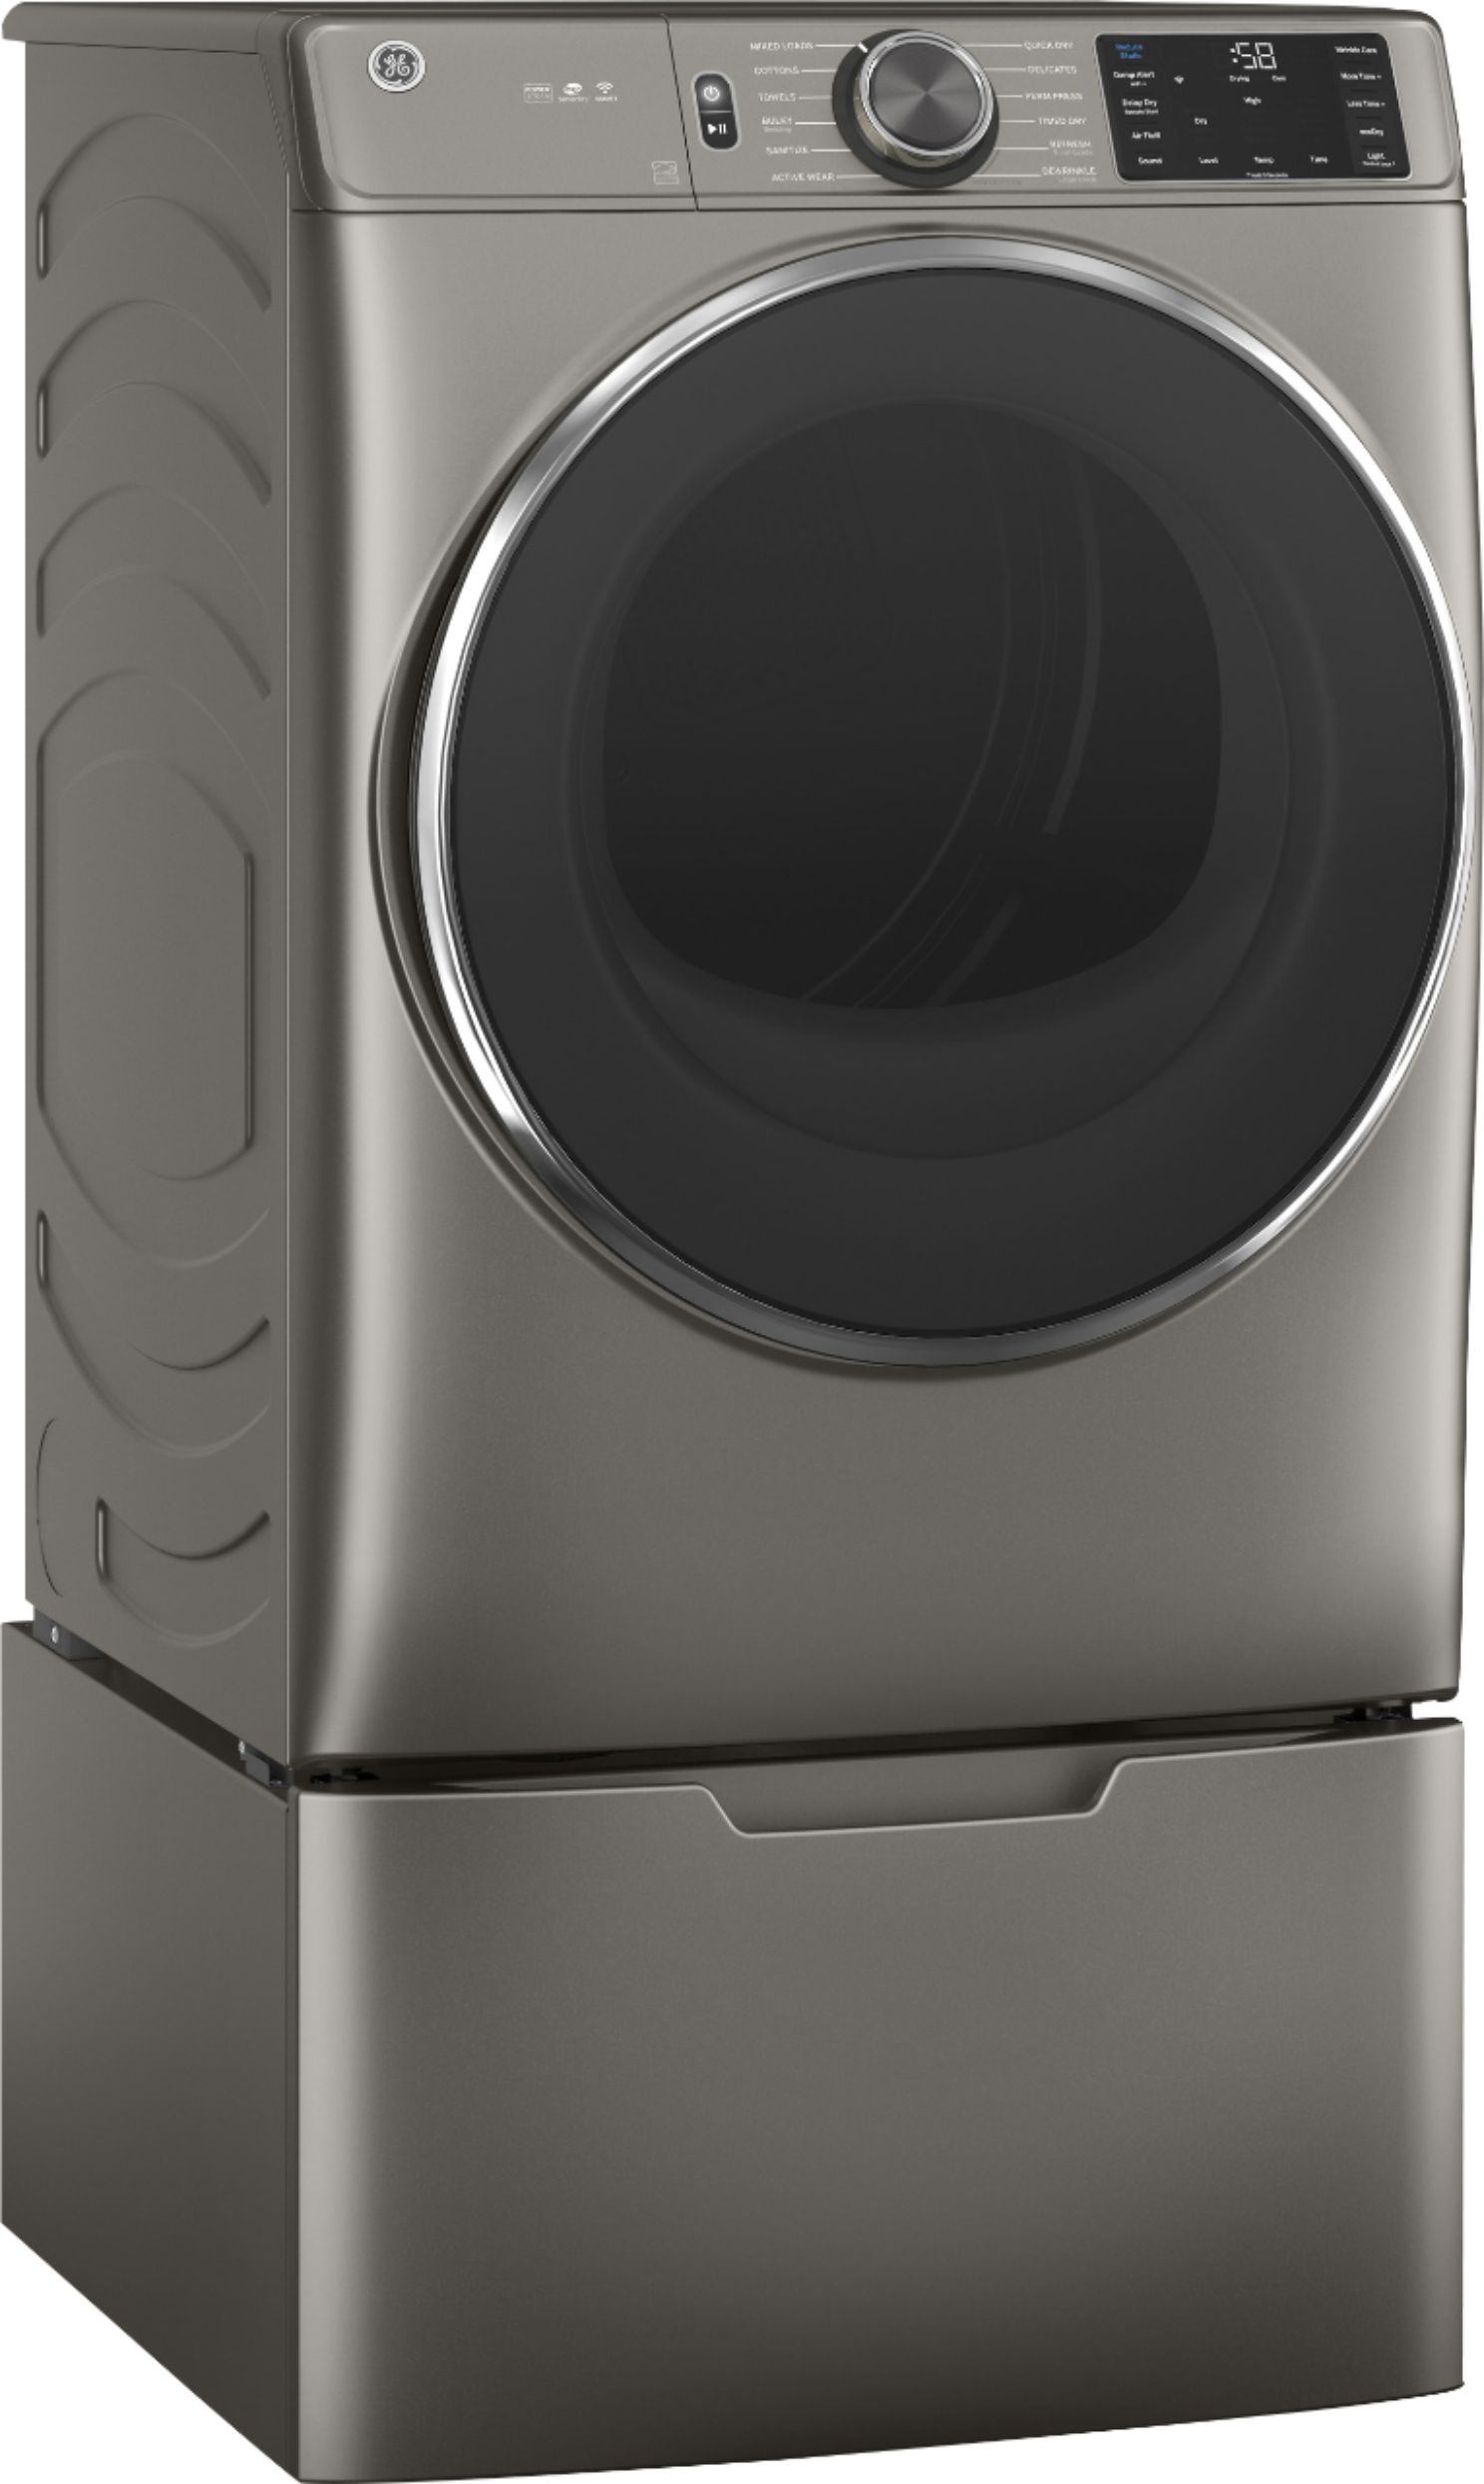 Angle View: "GE GFD65GSPNSN 28"" Front Load Gas Dryer with 7.8 cu. ft. Capacity Powersteam Built-in WiFi Sanitize Cycle and Vent Sensor in Satin Nickel"